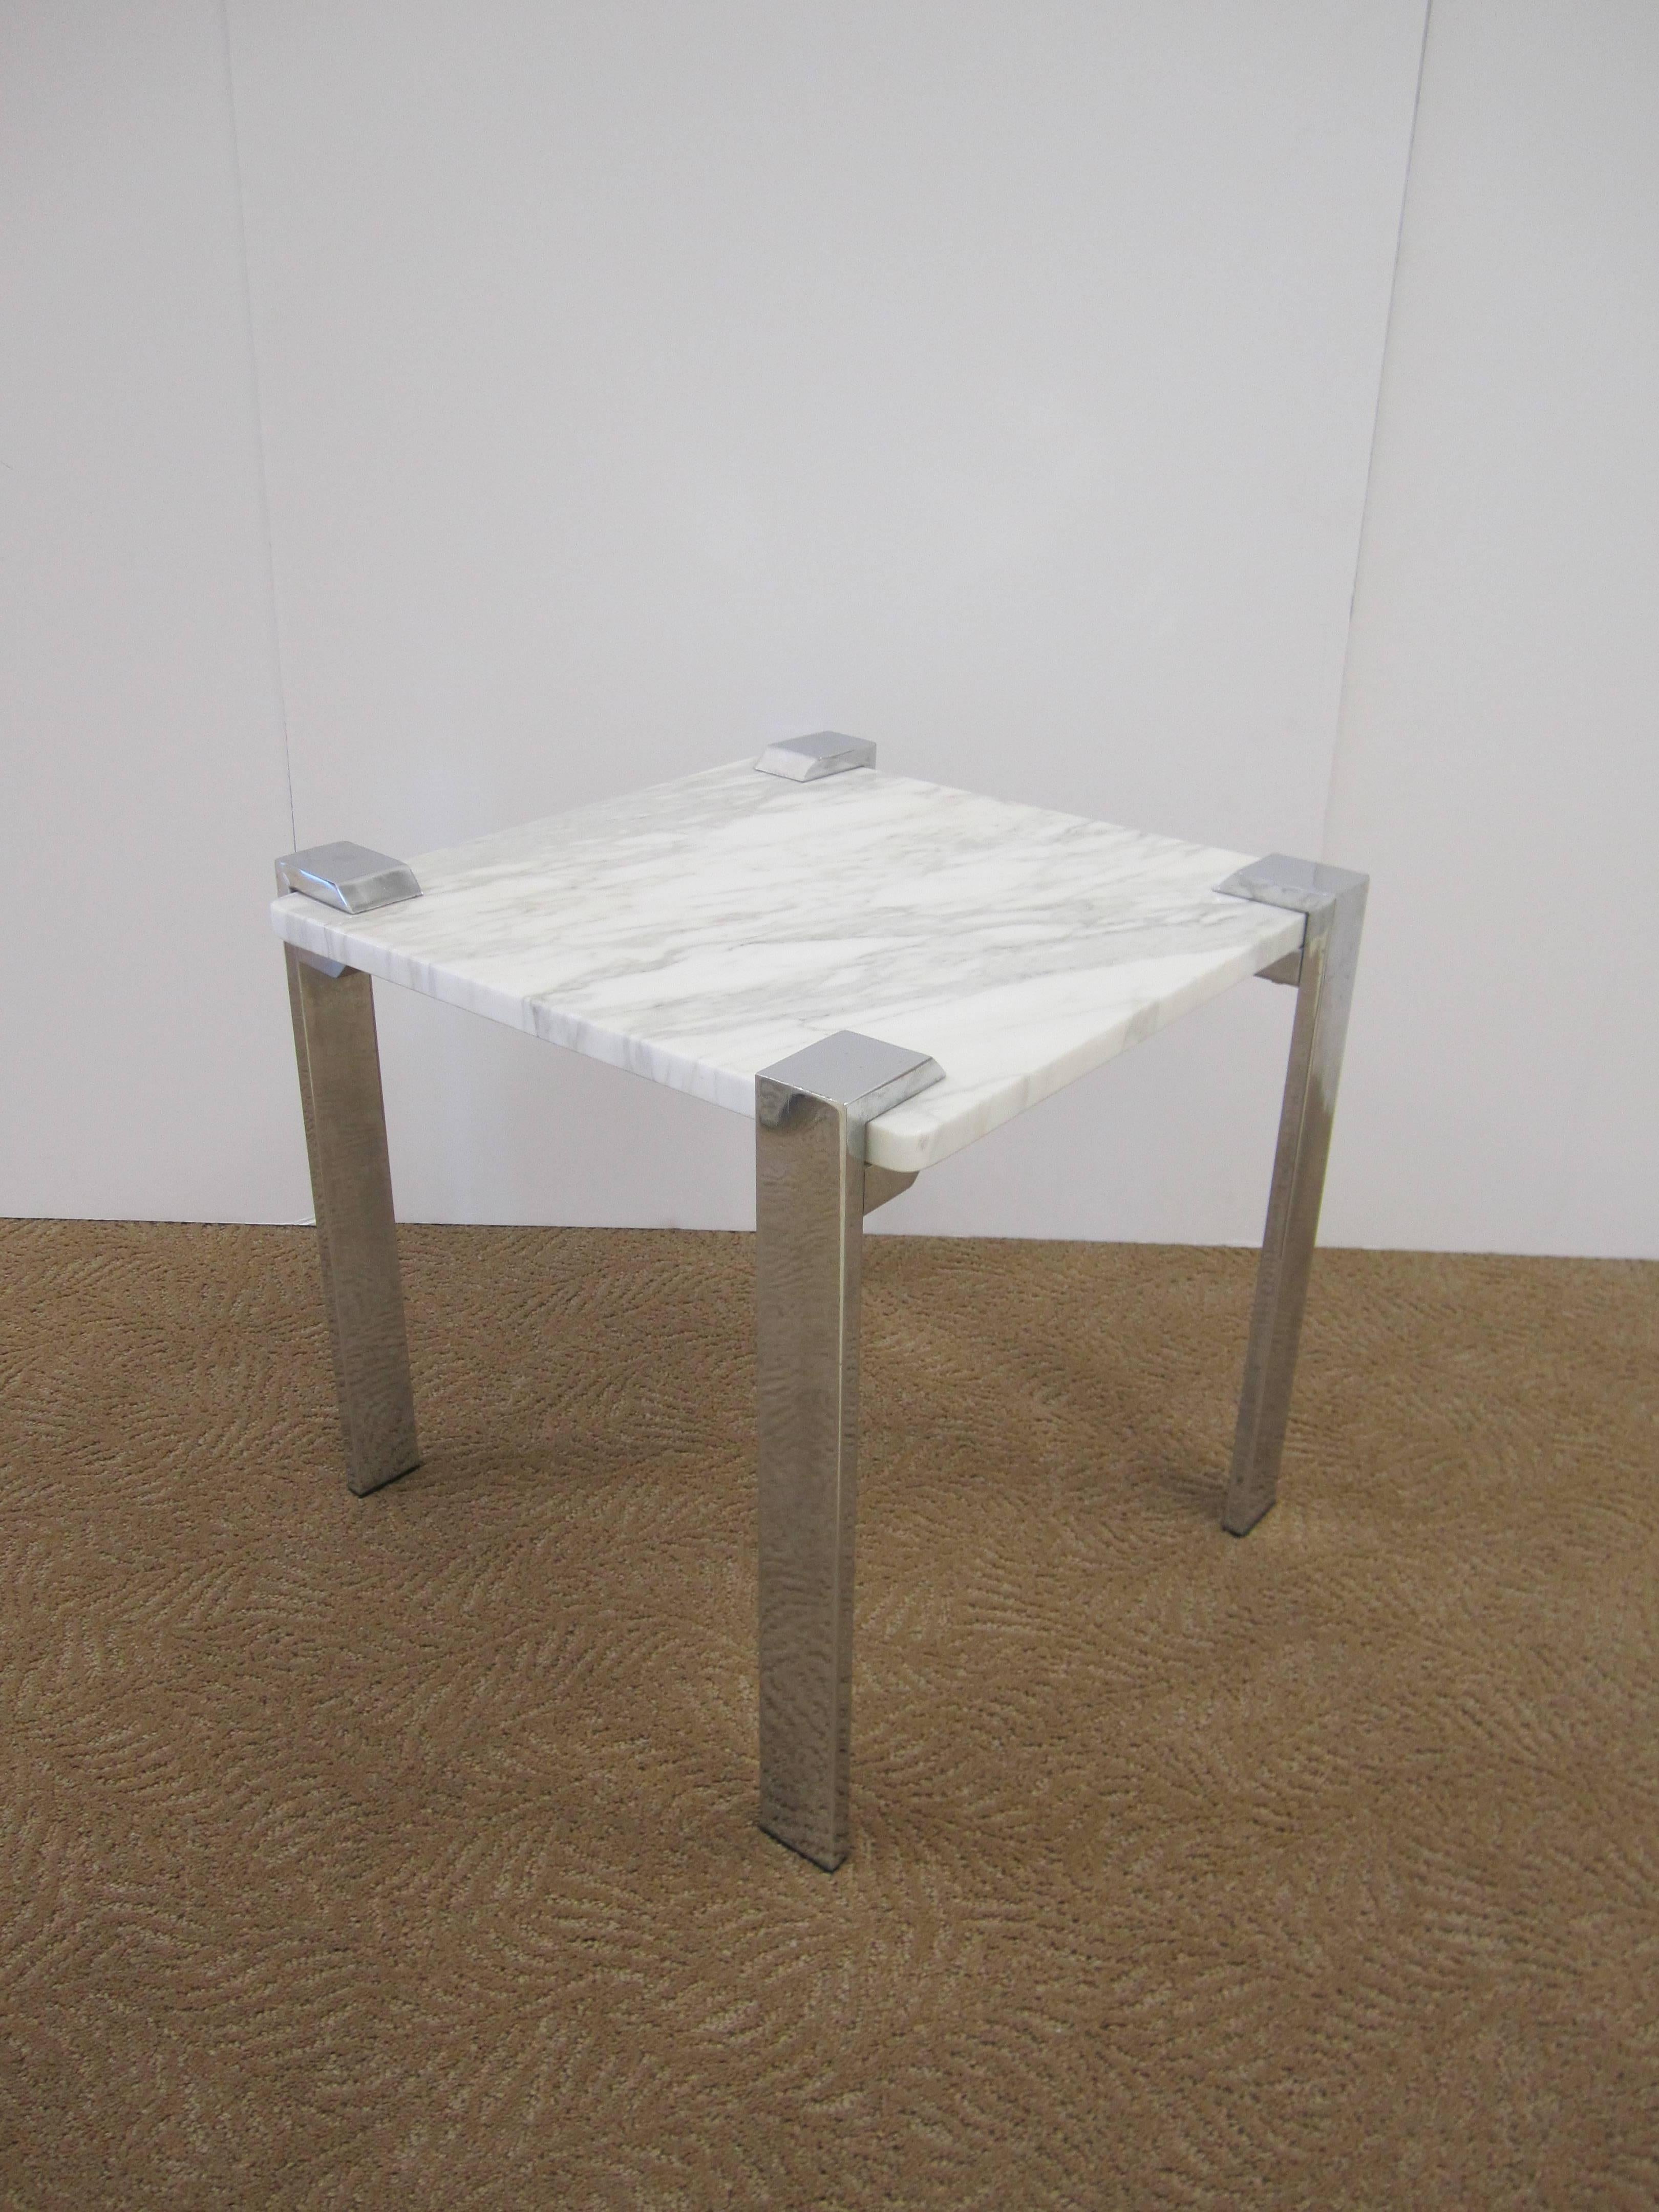 An Italian Modern chrome and marble side or end table from Italy, circa 1970s. Marble is white and grey, measuring 3/4 in. thick. Chrome base embraces marble top with rectangular legs. Marked Made in Italy in several places as show in images.